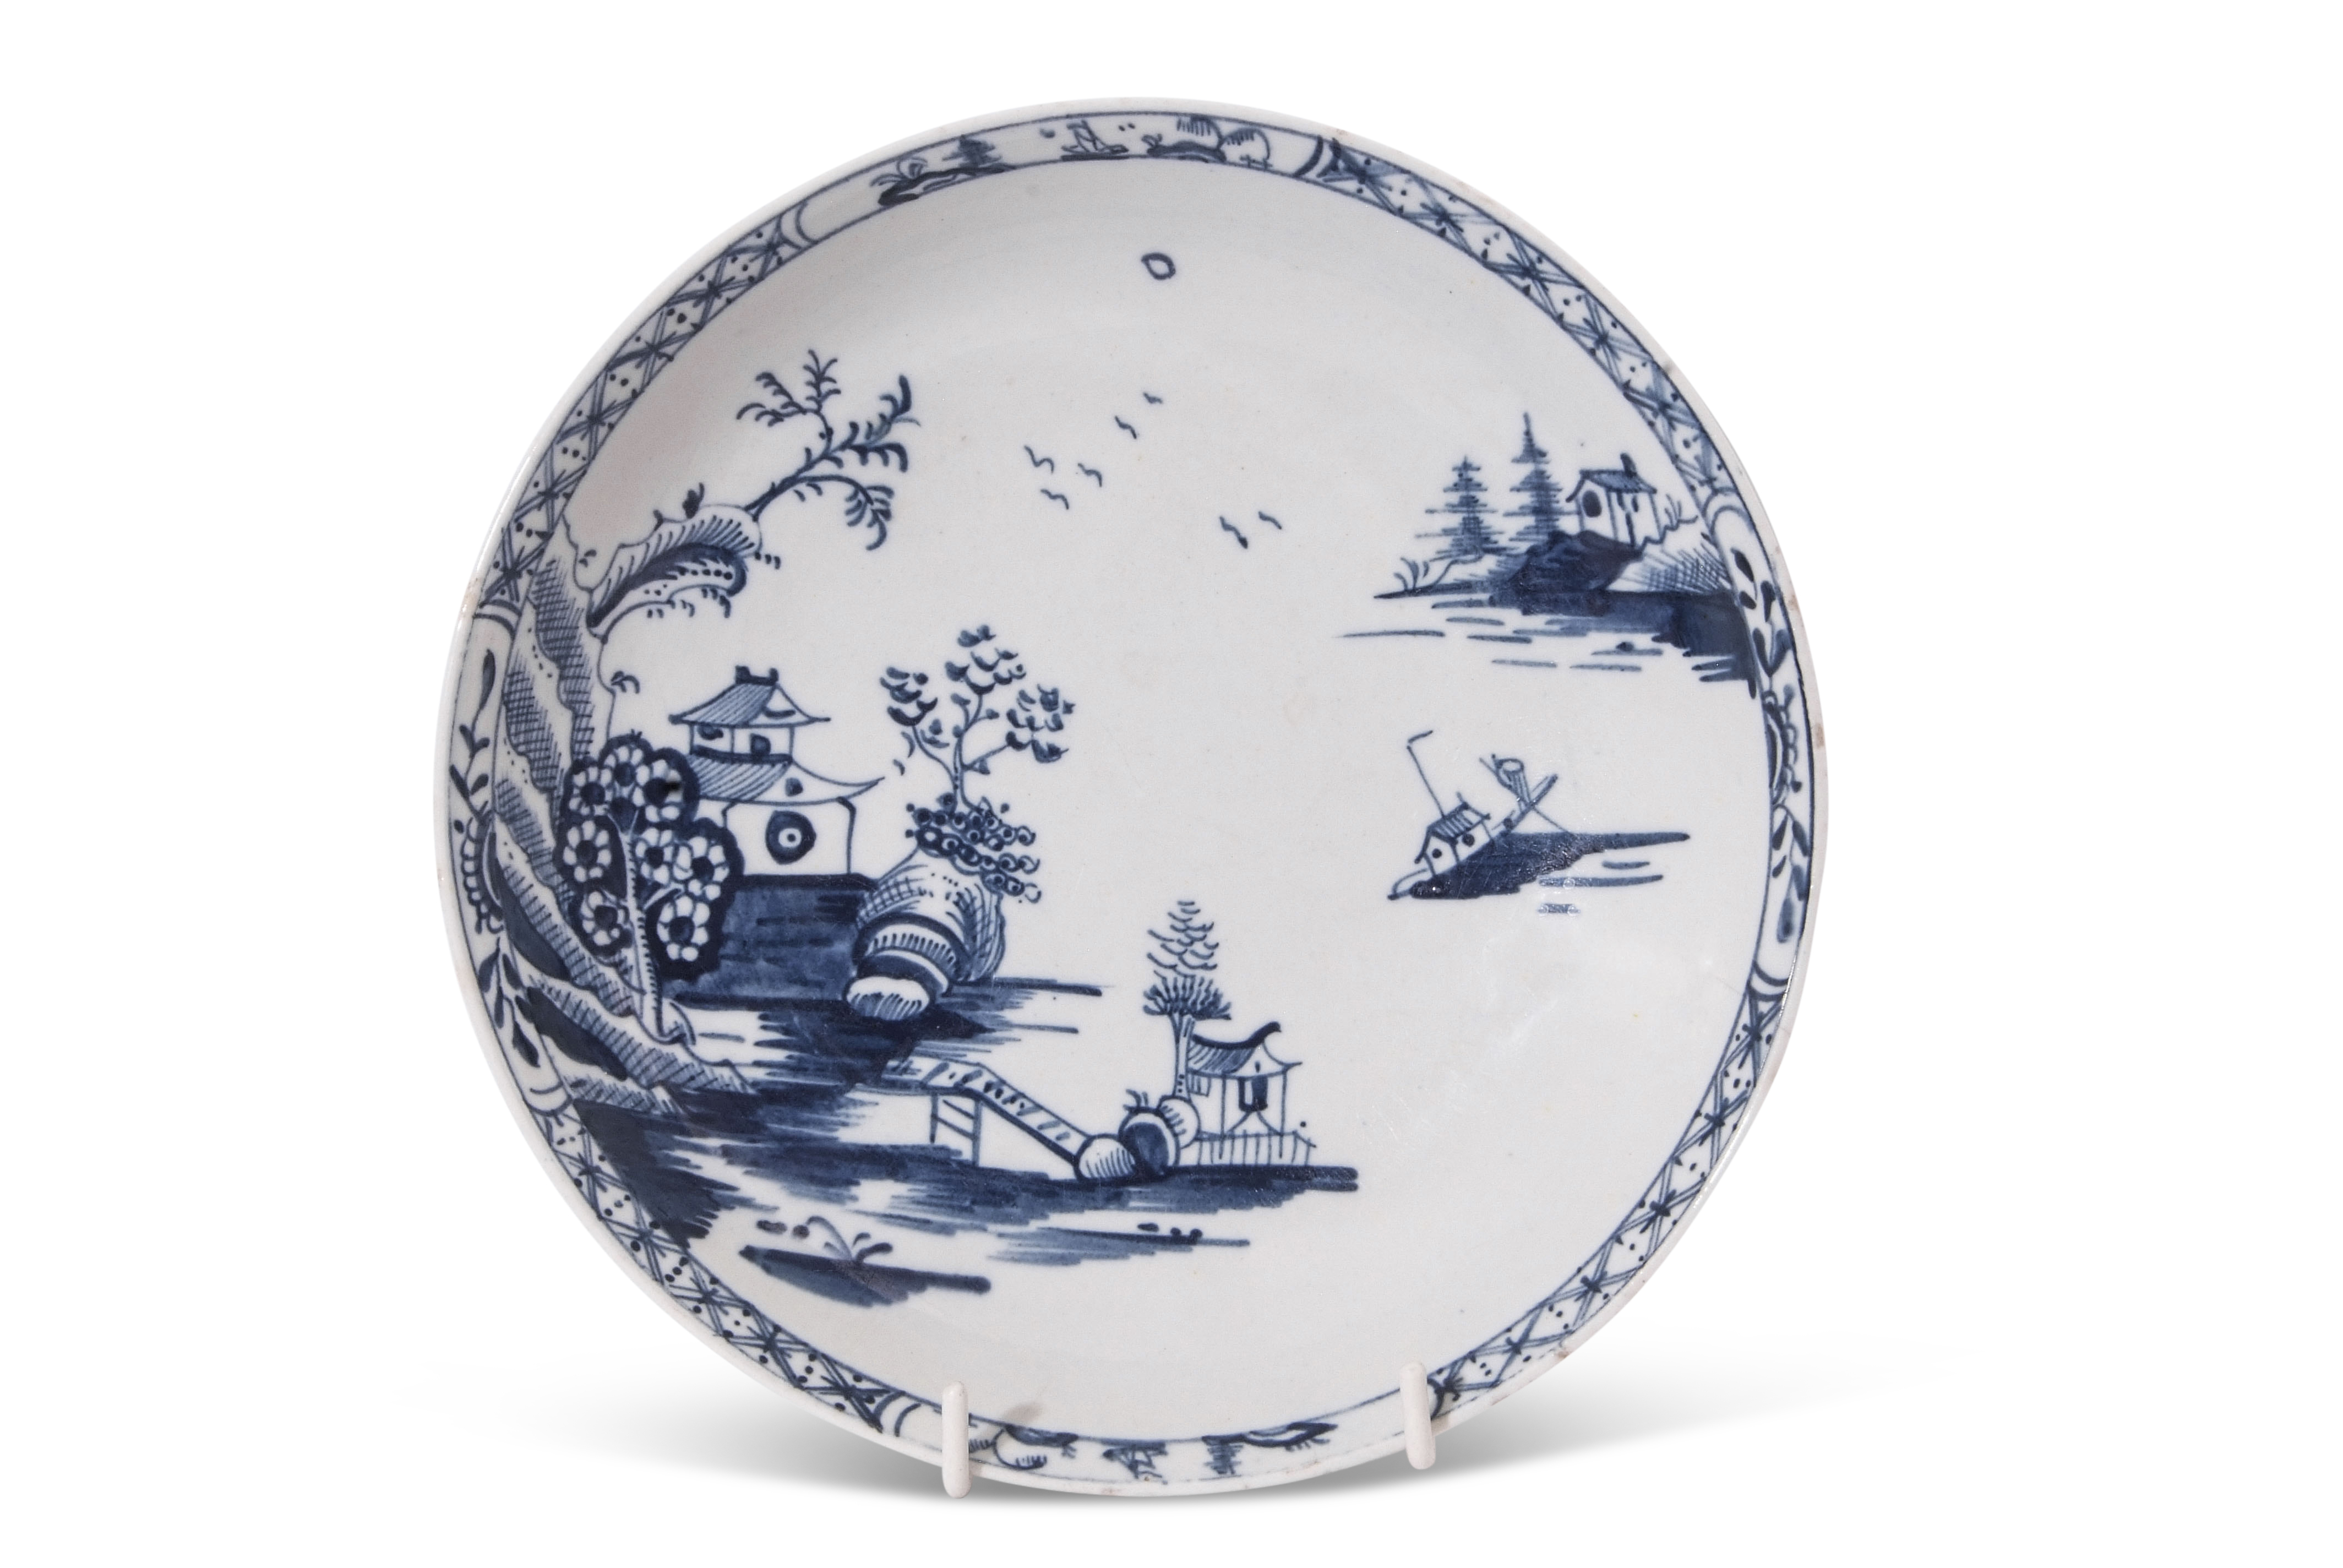 Lowestoft porcelain saucer dish decorated with a chinoiserie river scene, the border with small